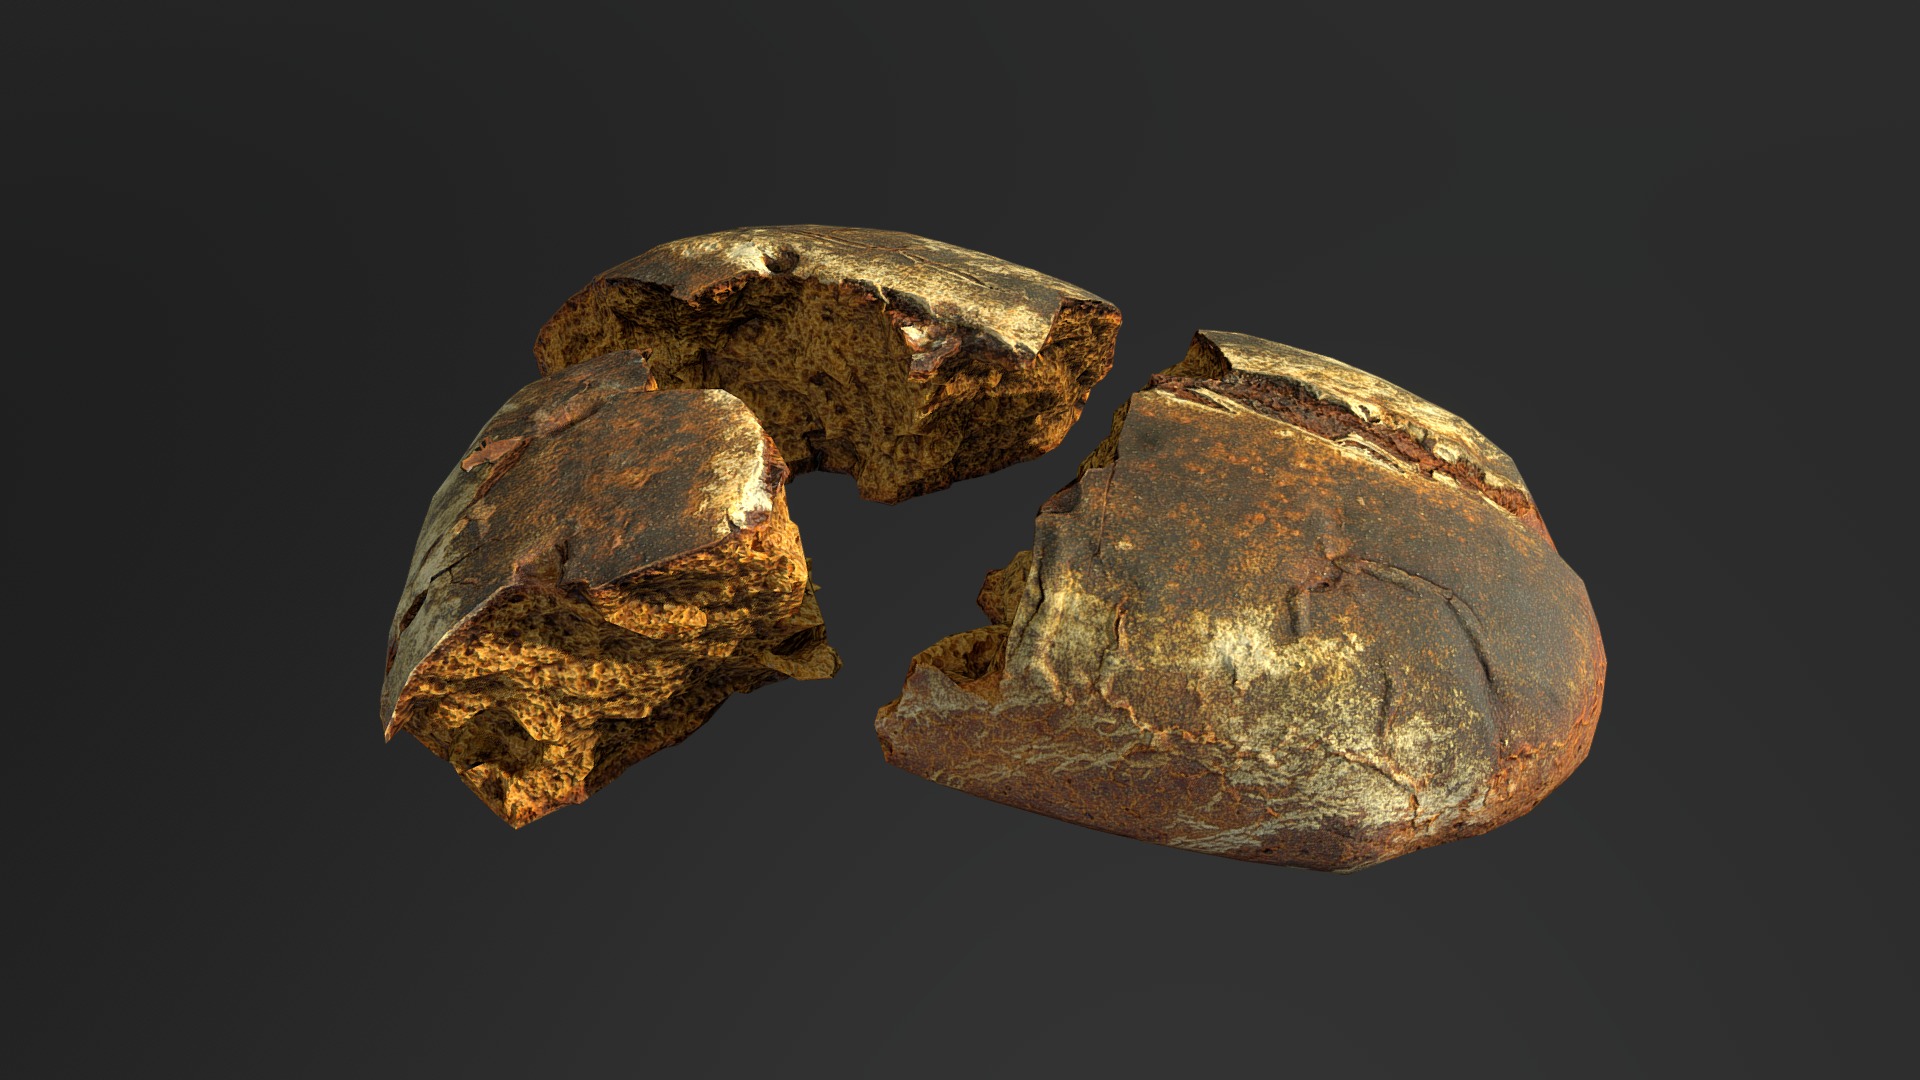 3D model TastyBreadPack vol.01 Model Six - This is a 3D model of the TastyBreadPack vol.01 Model Six. The 3D model is about a few rocks with a dark background.